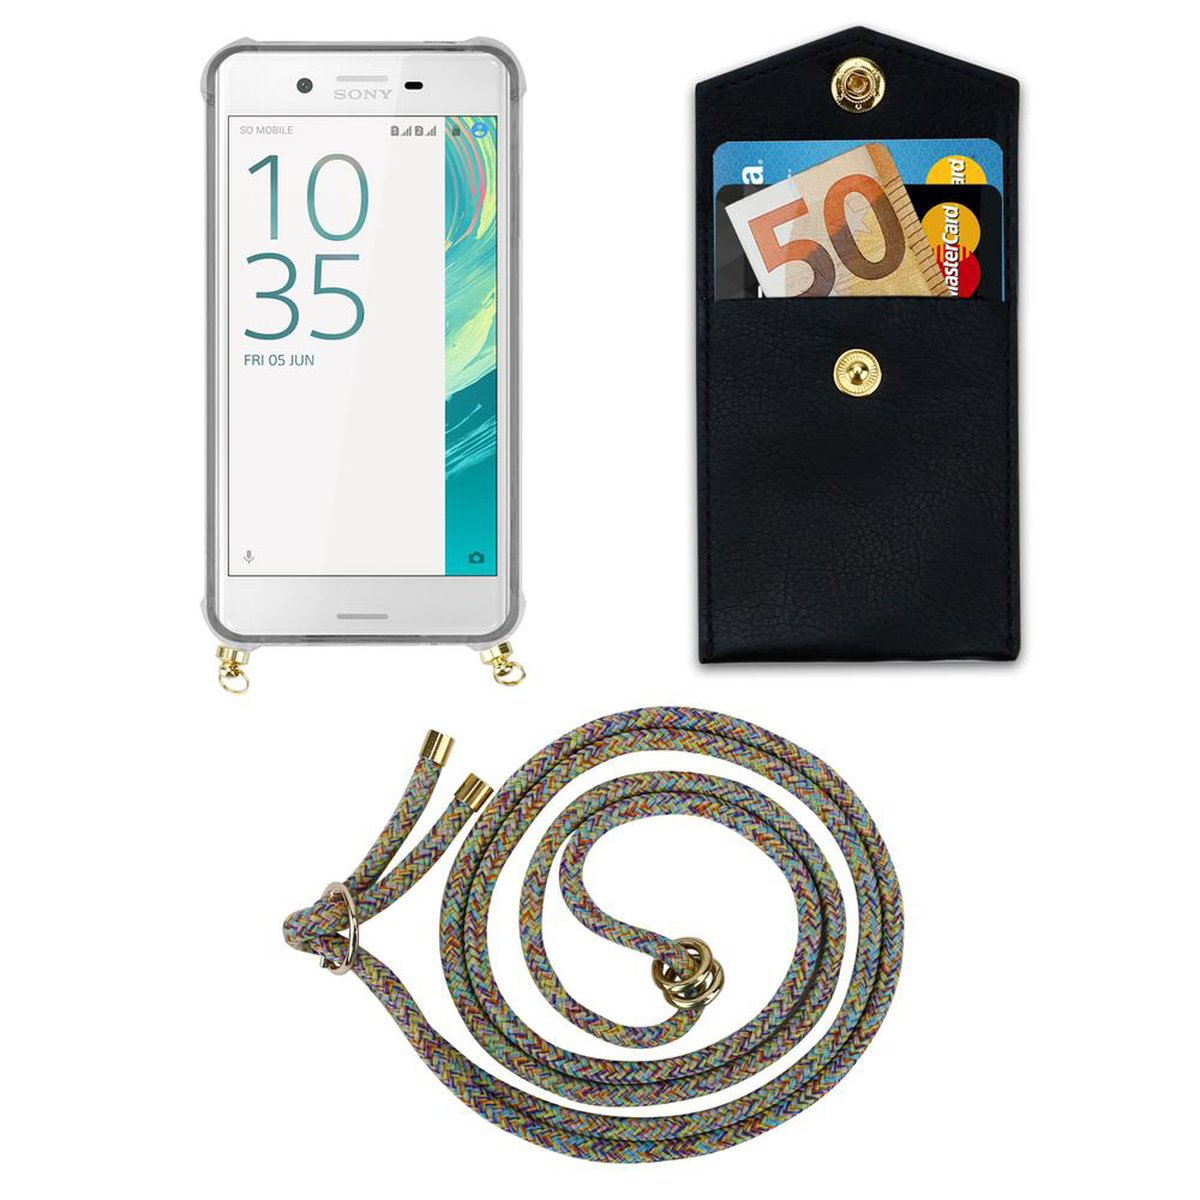 Kette abnehmbarer Band Xperia und Gold Kordel Sony, CADORABO Ringen, Handy mit Hülle, X, Backcover, RAINBOW